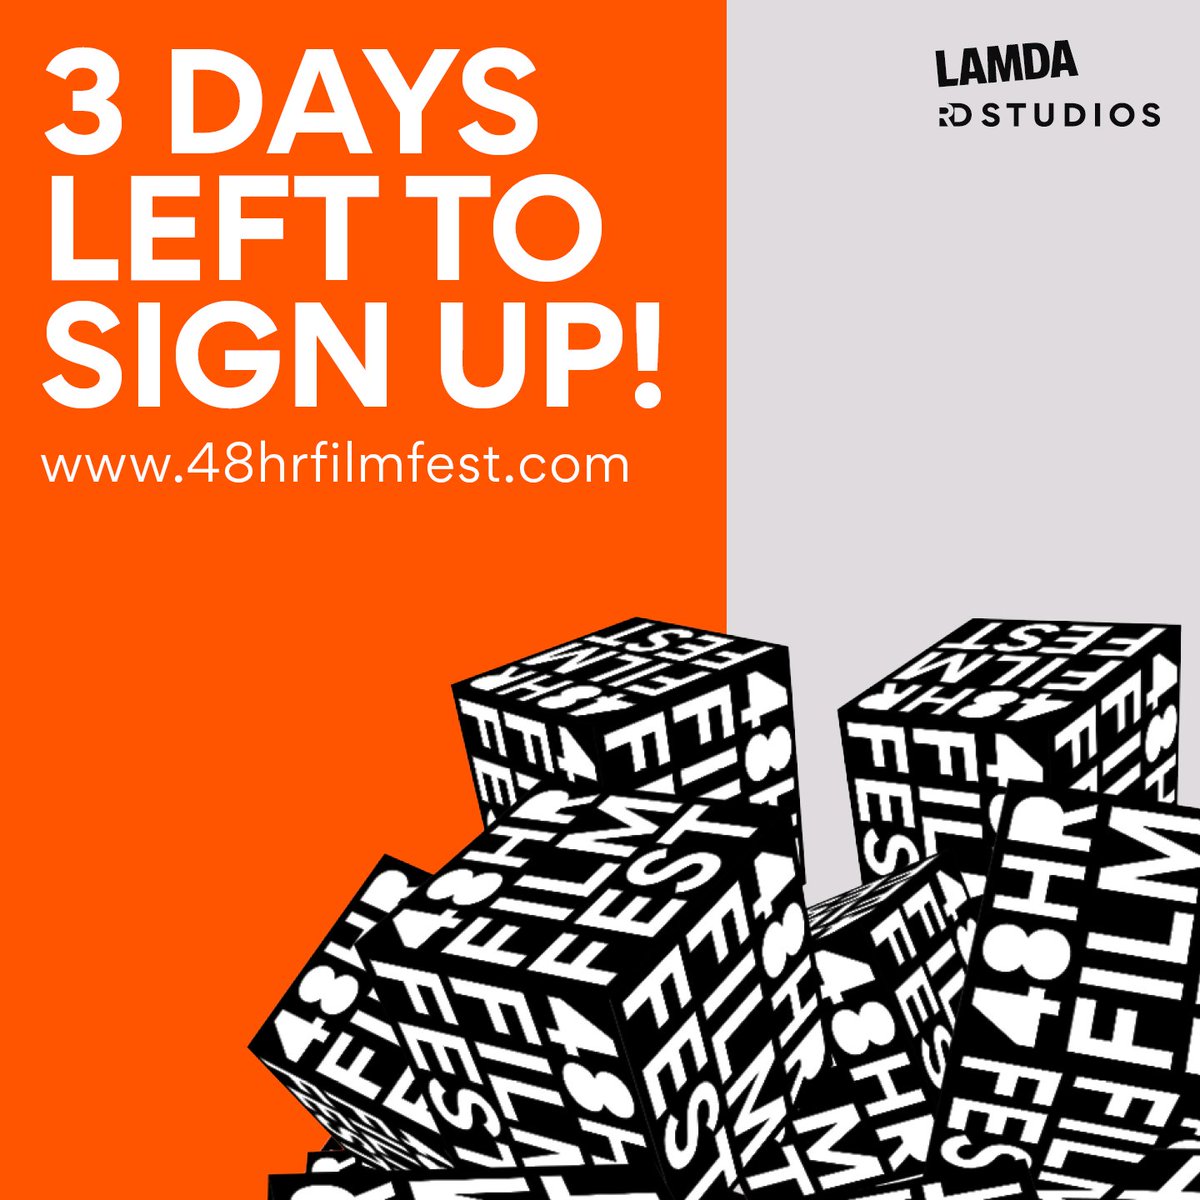 We’ve been overwhelmed by the response to our 48-Hour Film Festival, in collaboration with pioneering production company RD Studios so far! 📽️ There’s still 3 DAYS left to apply. Don’t delay 👉 lamda.ac.uk/news/lamda-lau… to go